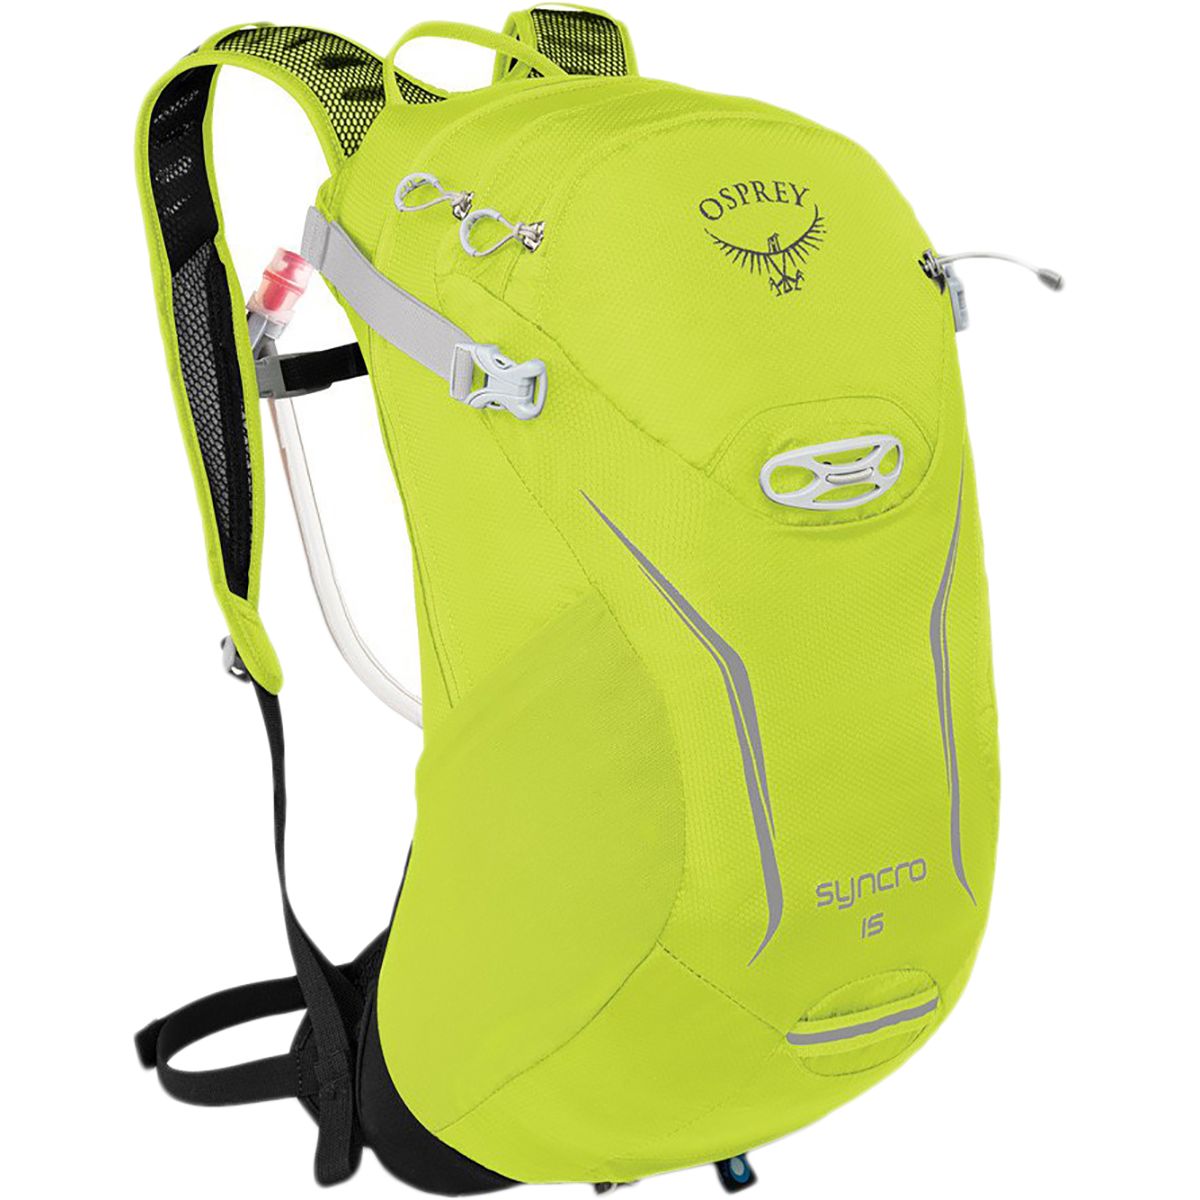 Osprey Packs Syncro 15 Hydration Backpack 793 915cu in